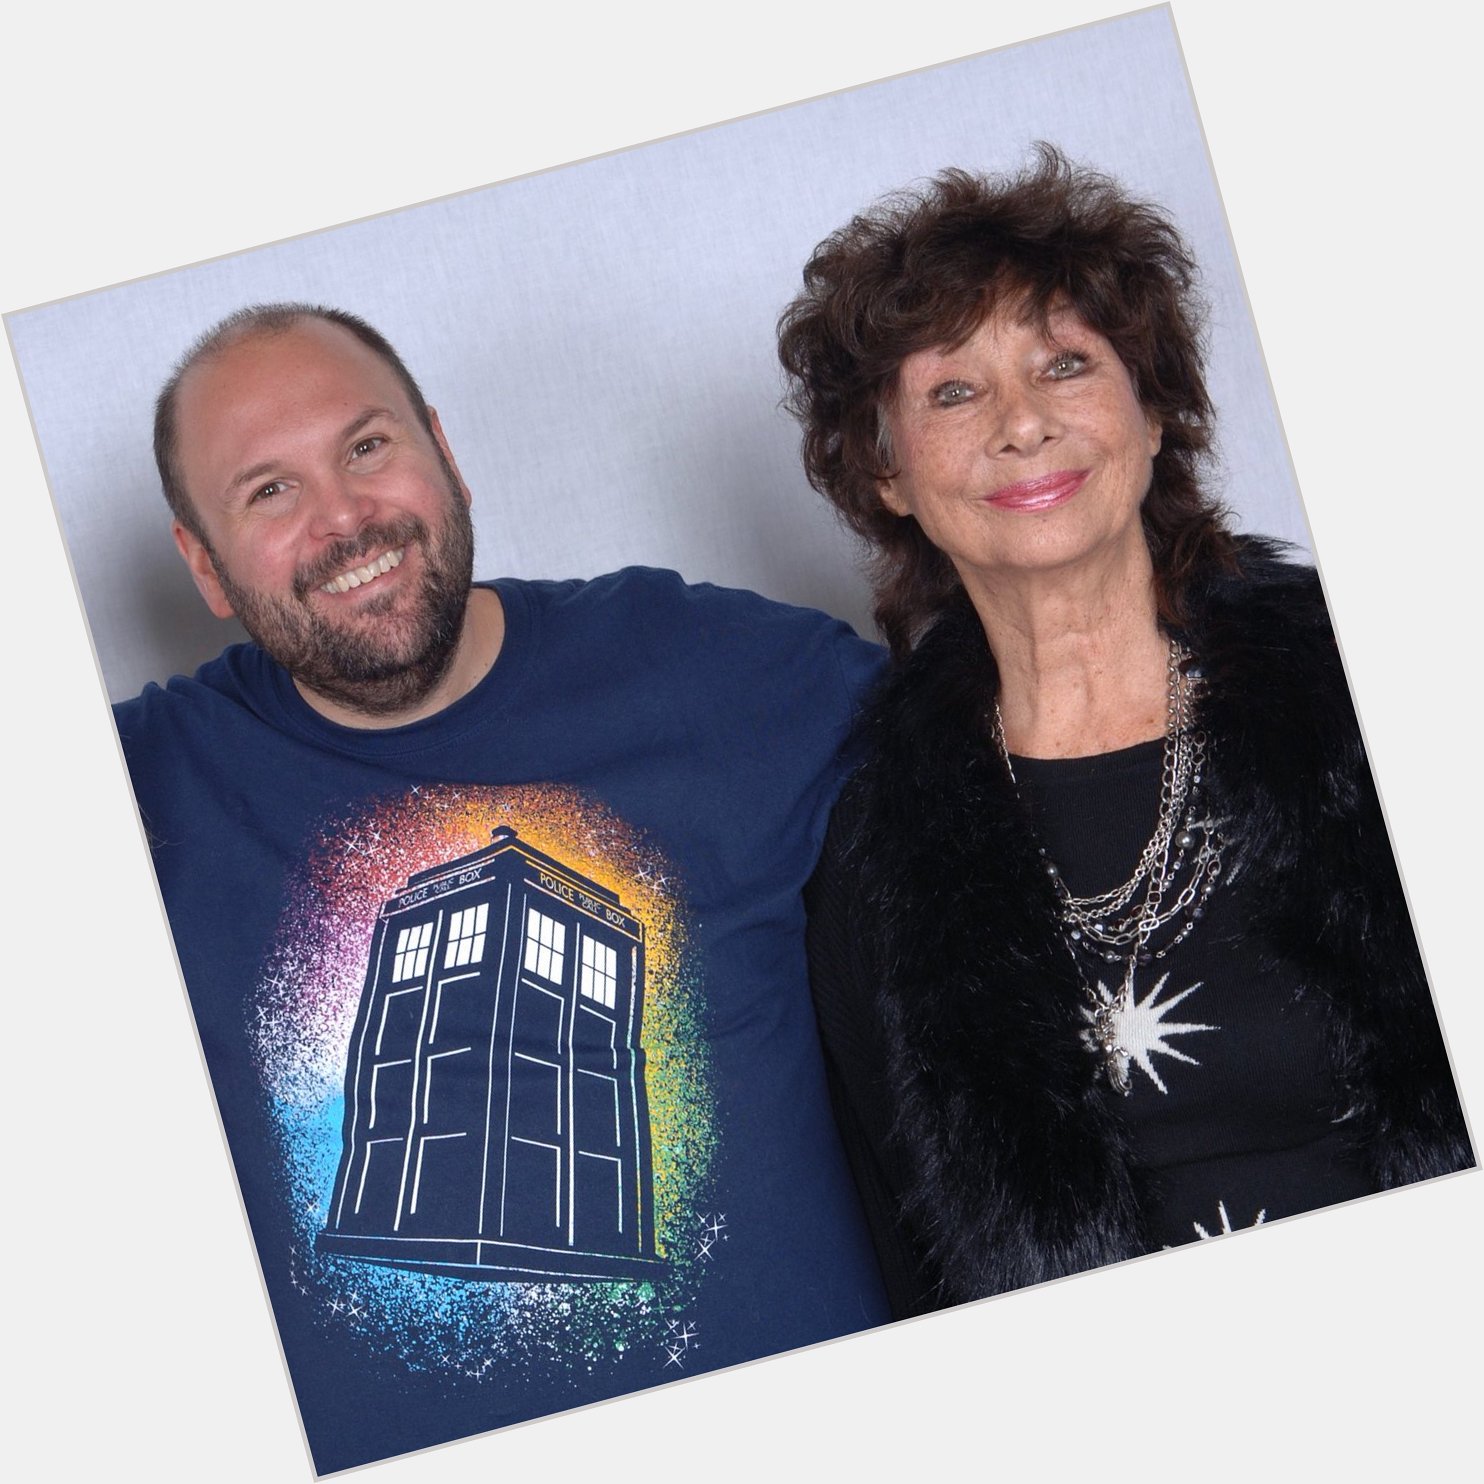 Susan?...surely it s Susan?!
Wishing Carole Ann Ford a very happy birthday today!   